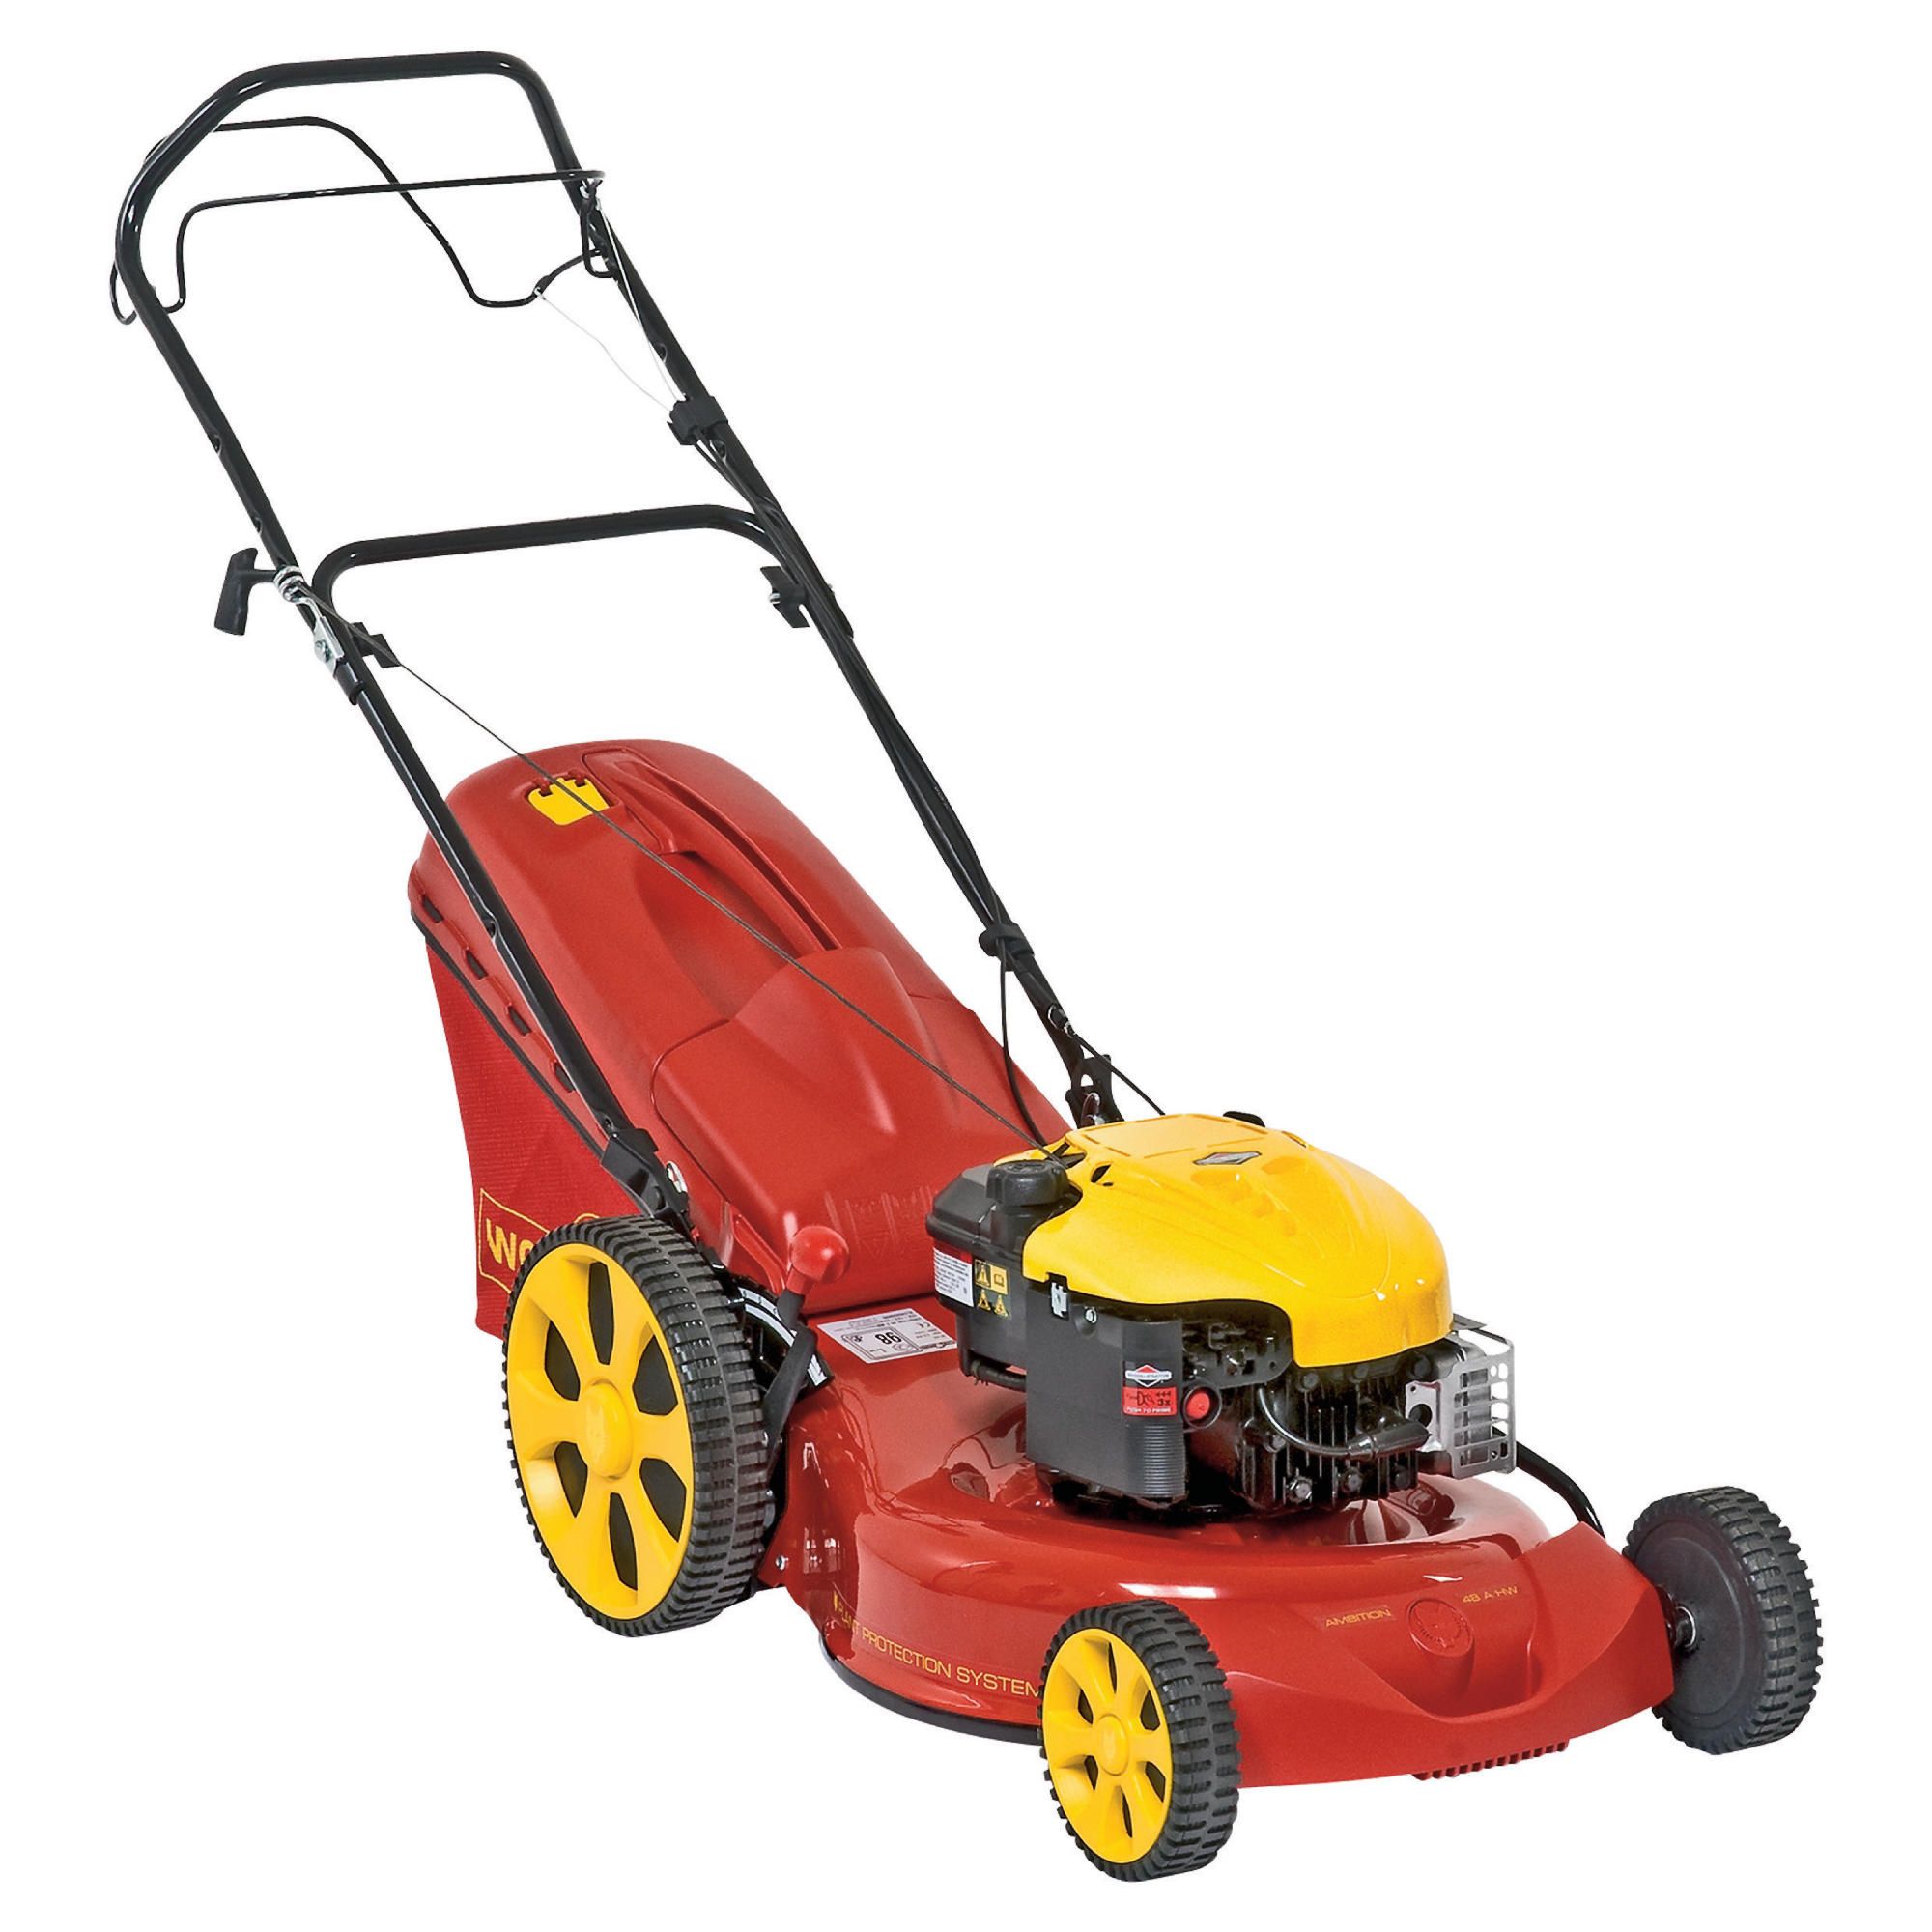 Wolf Ambition Petrol Lawnmower A53AHW at Tesco Direct